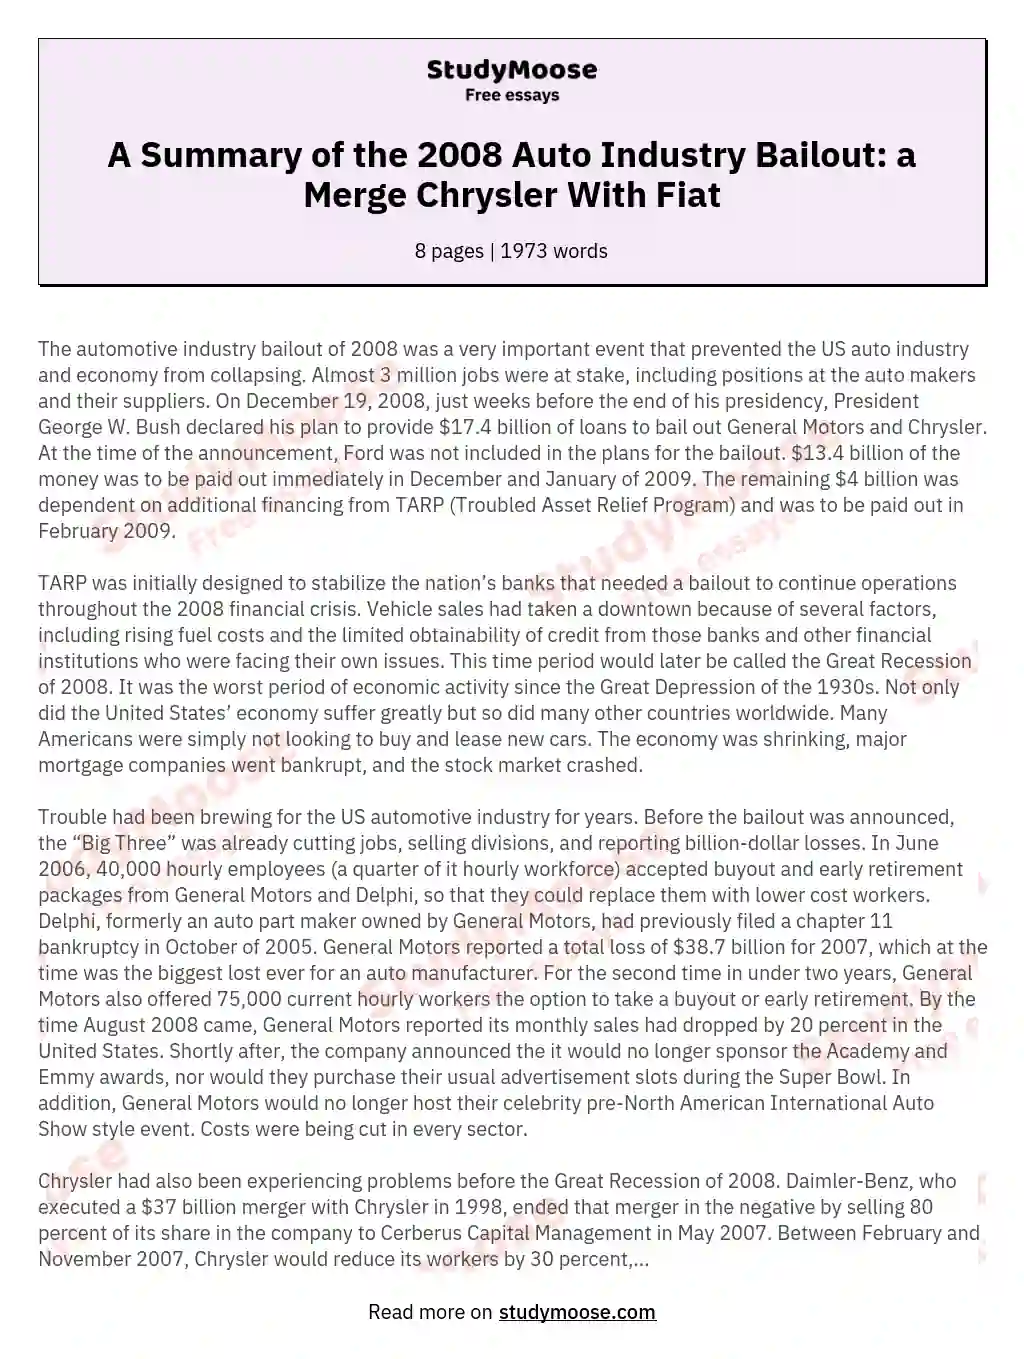 A Summary of the 2008 Auto Industry Bailout: a Merge Chrysler With Fiat essay